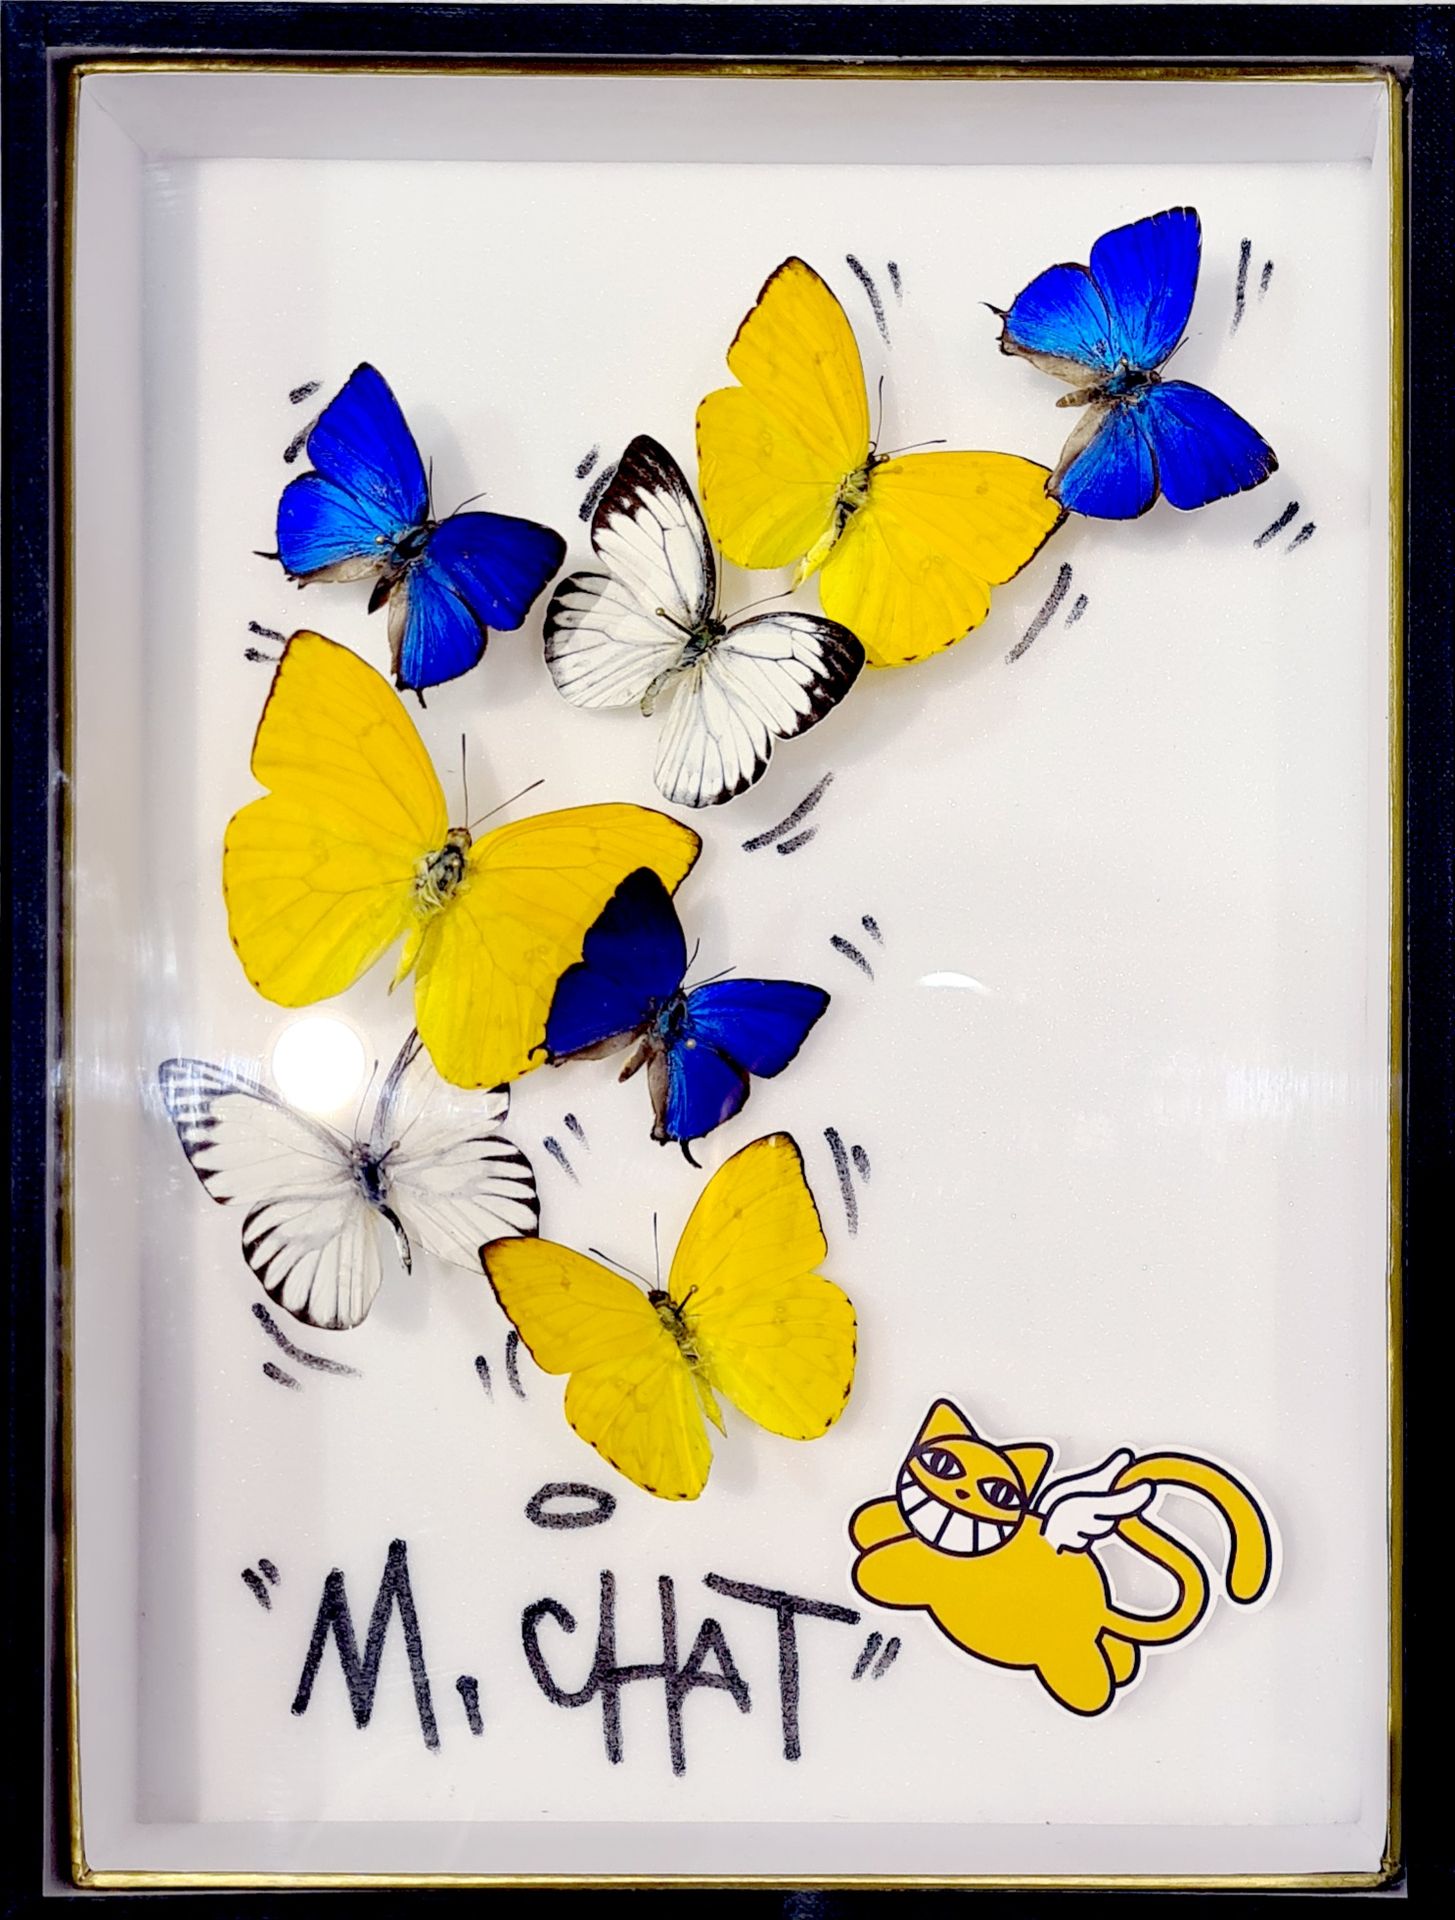 B. Pietri B. Pietri - M. Chat

Real butterflies and cat by M. Chat pinned in an &hellip;